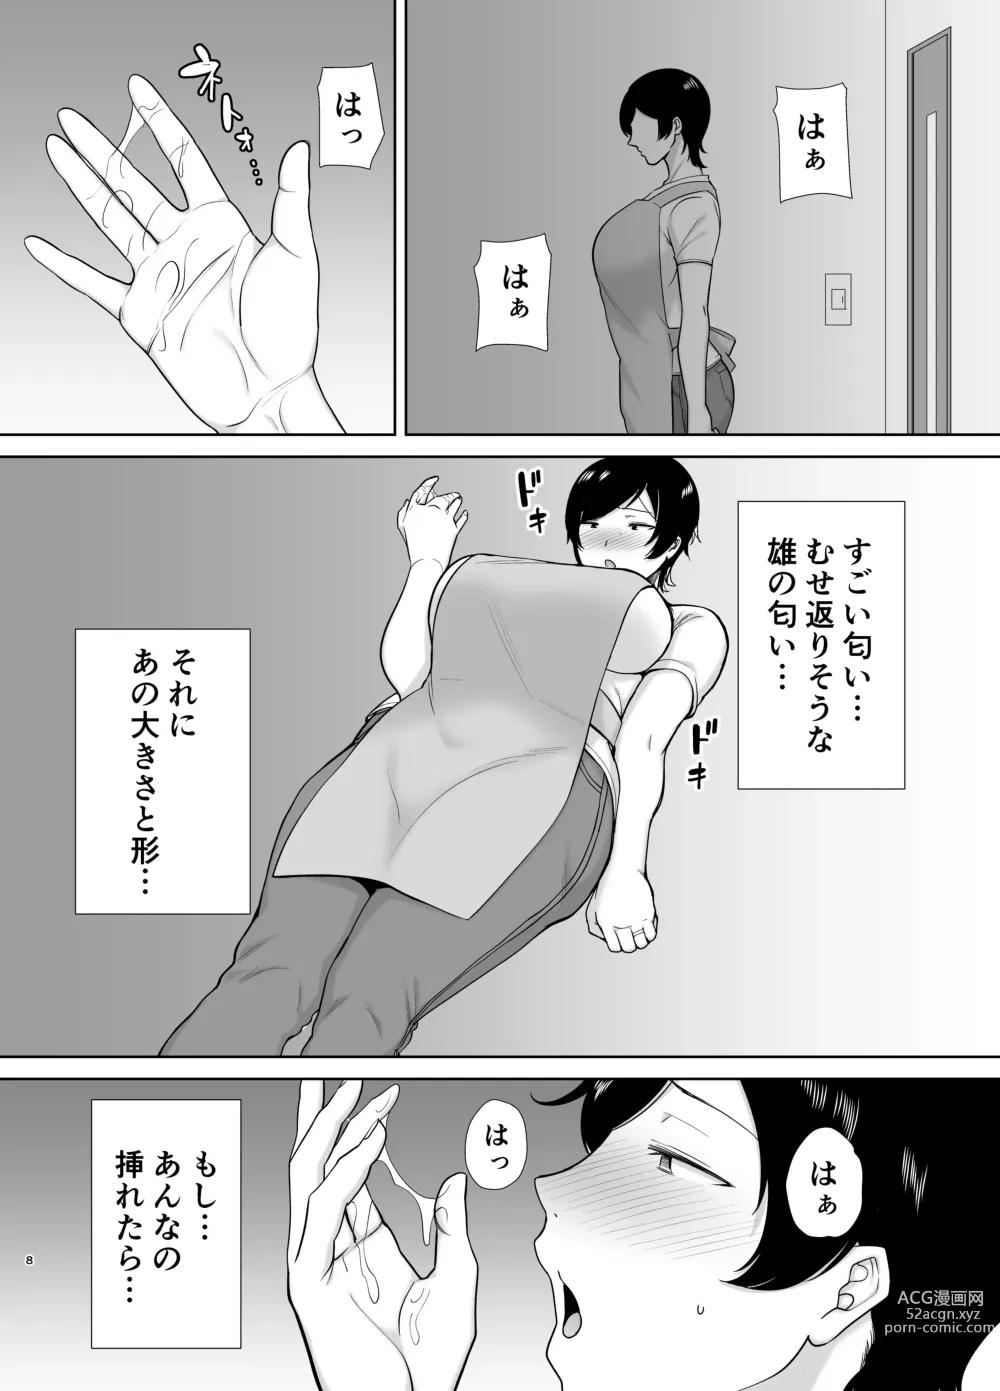 Page 7 of doujinshi 母さんだって女なんだよ！